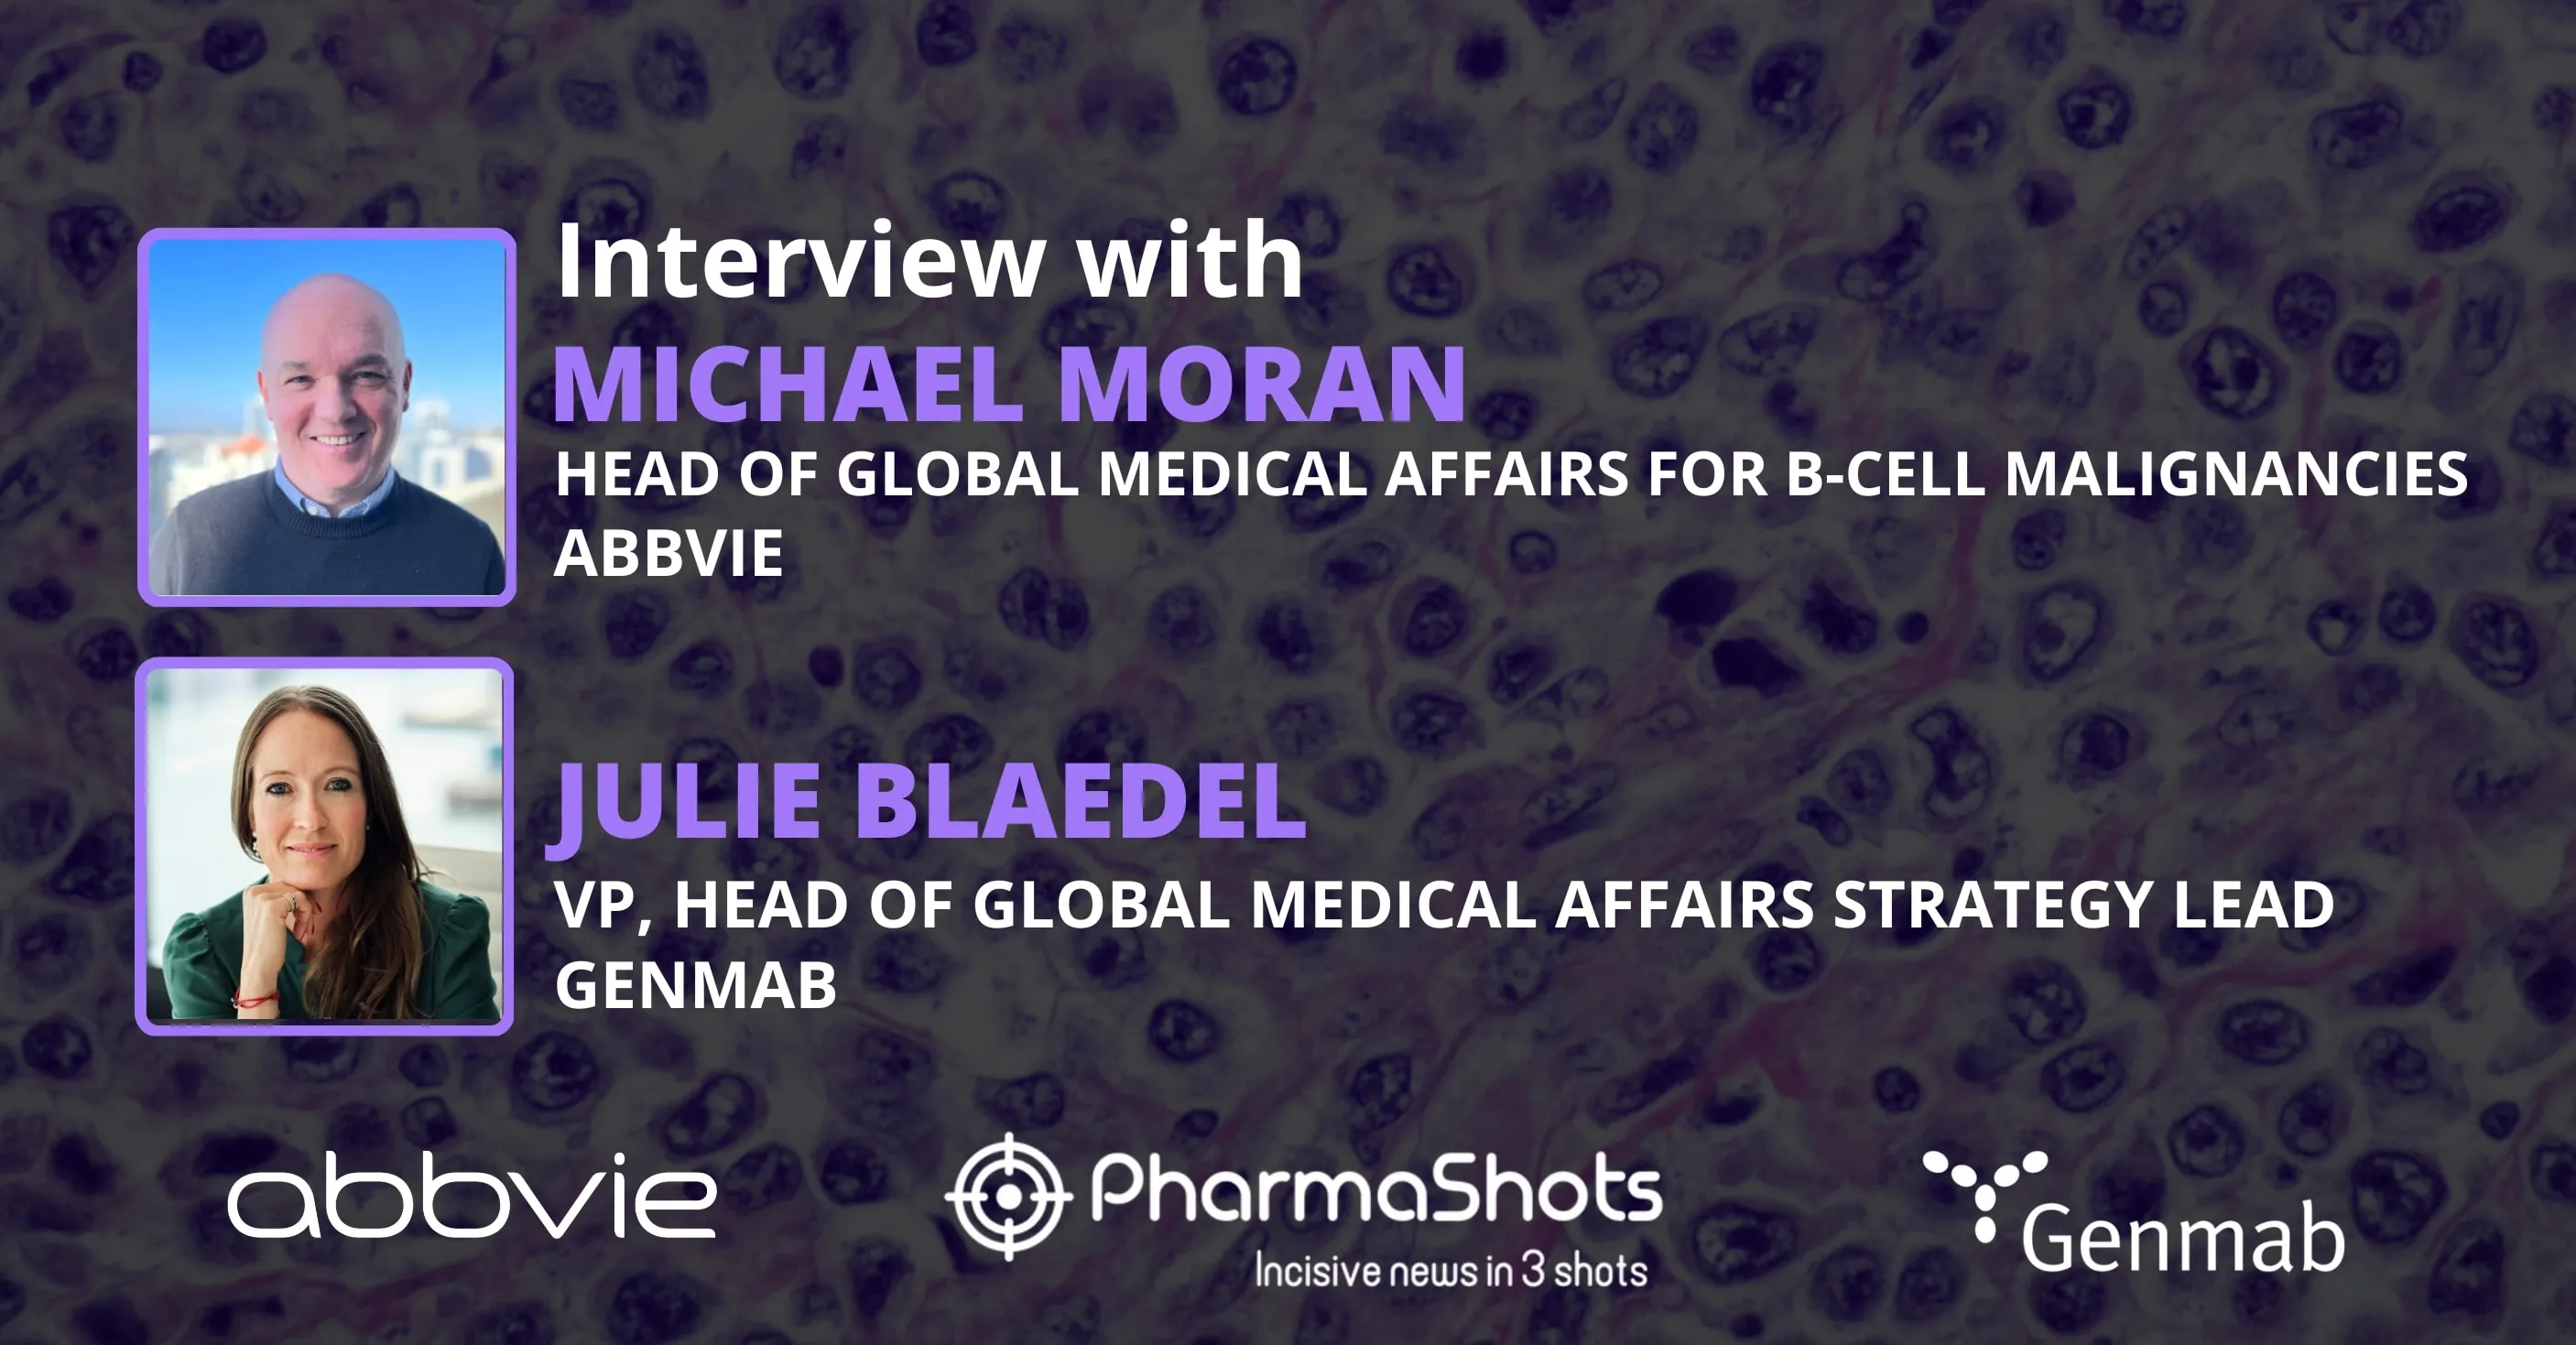 Julie Blaedel from Genmab and Michael Moran from AbbVie Discuss the Conditional EC Approval of TEPKINLY in a Stimulating Conversation with PharmaShots